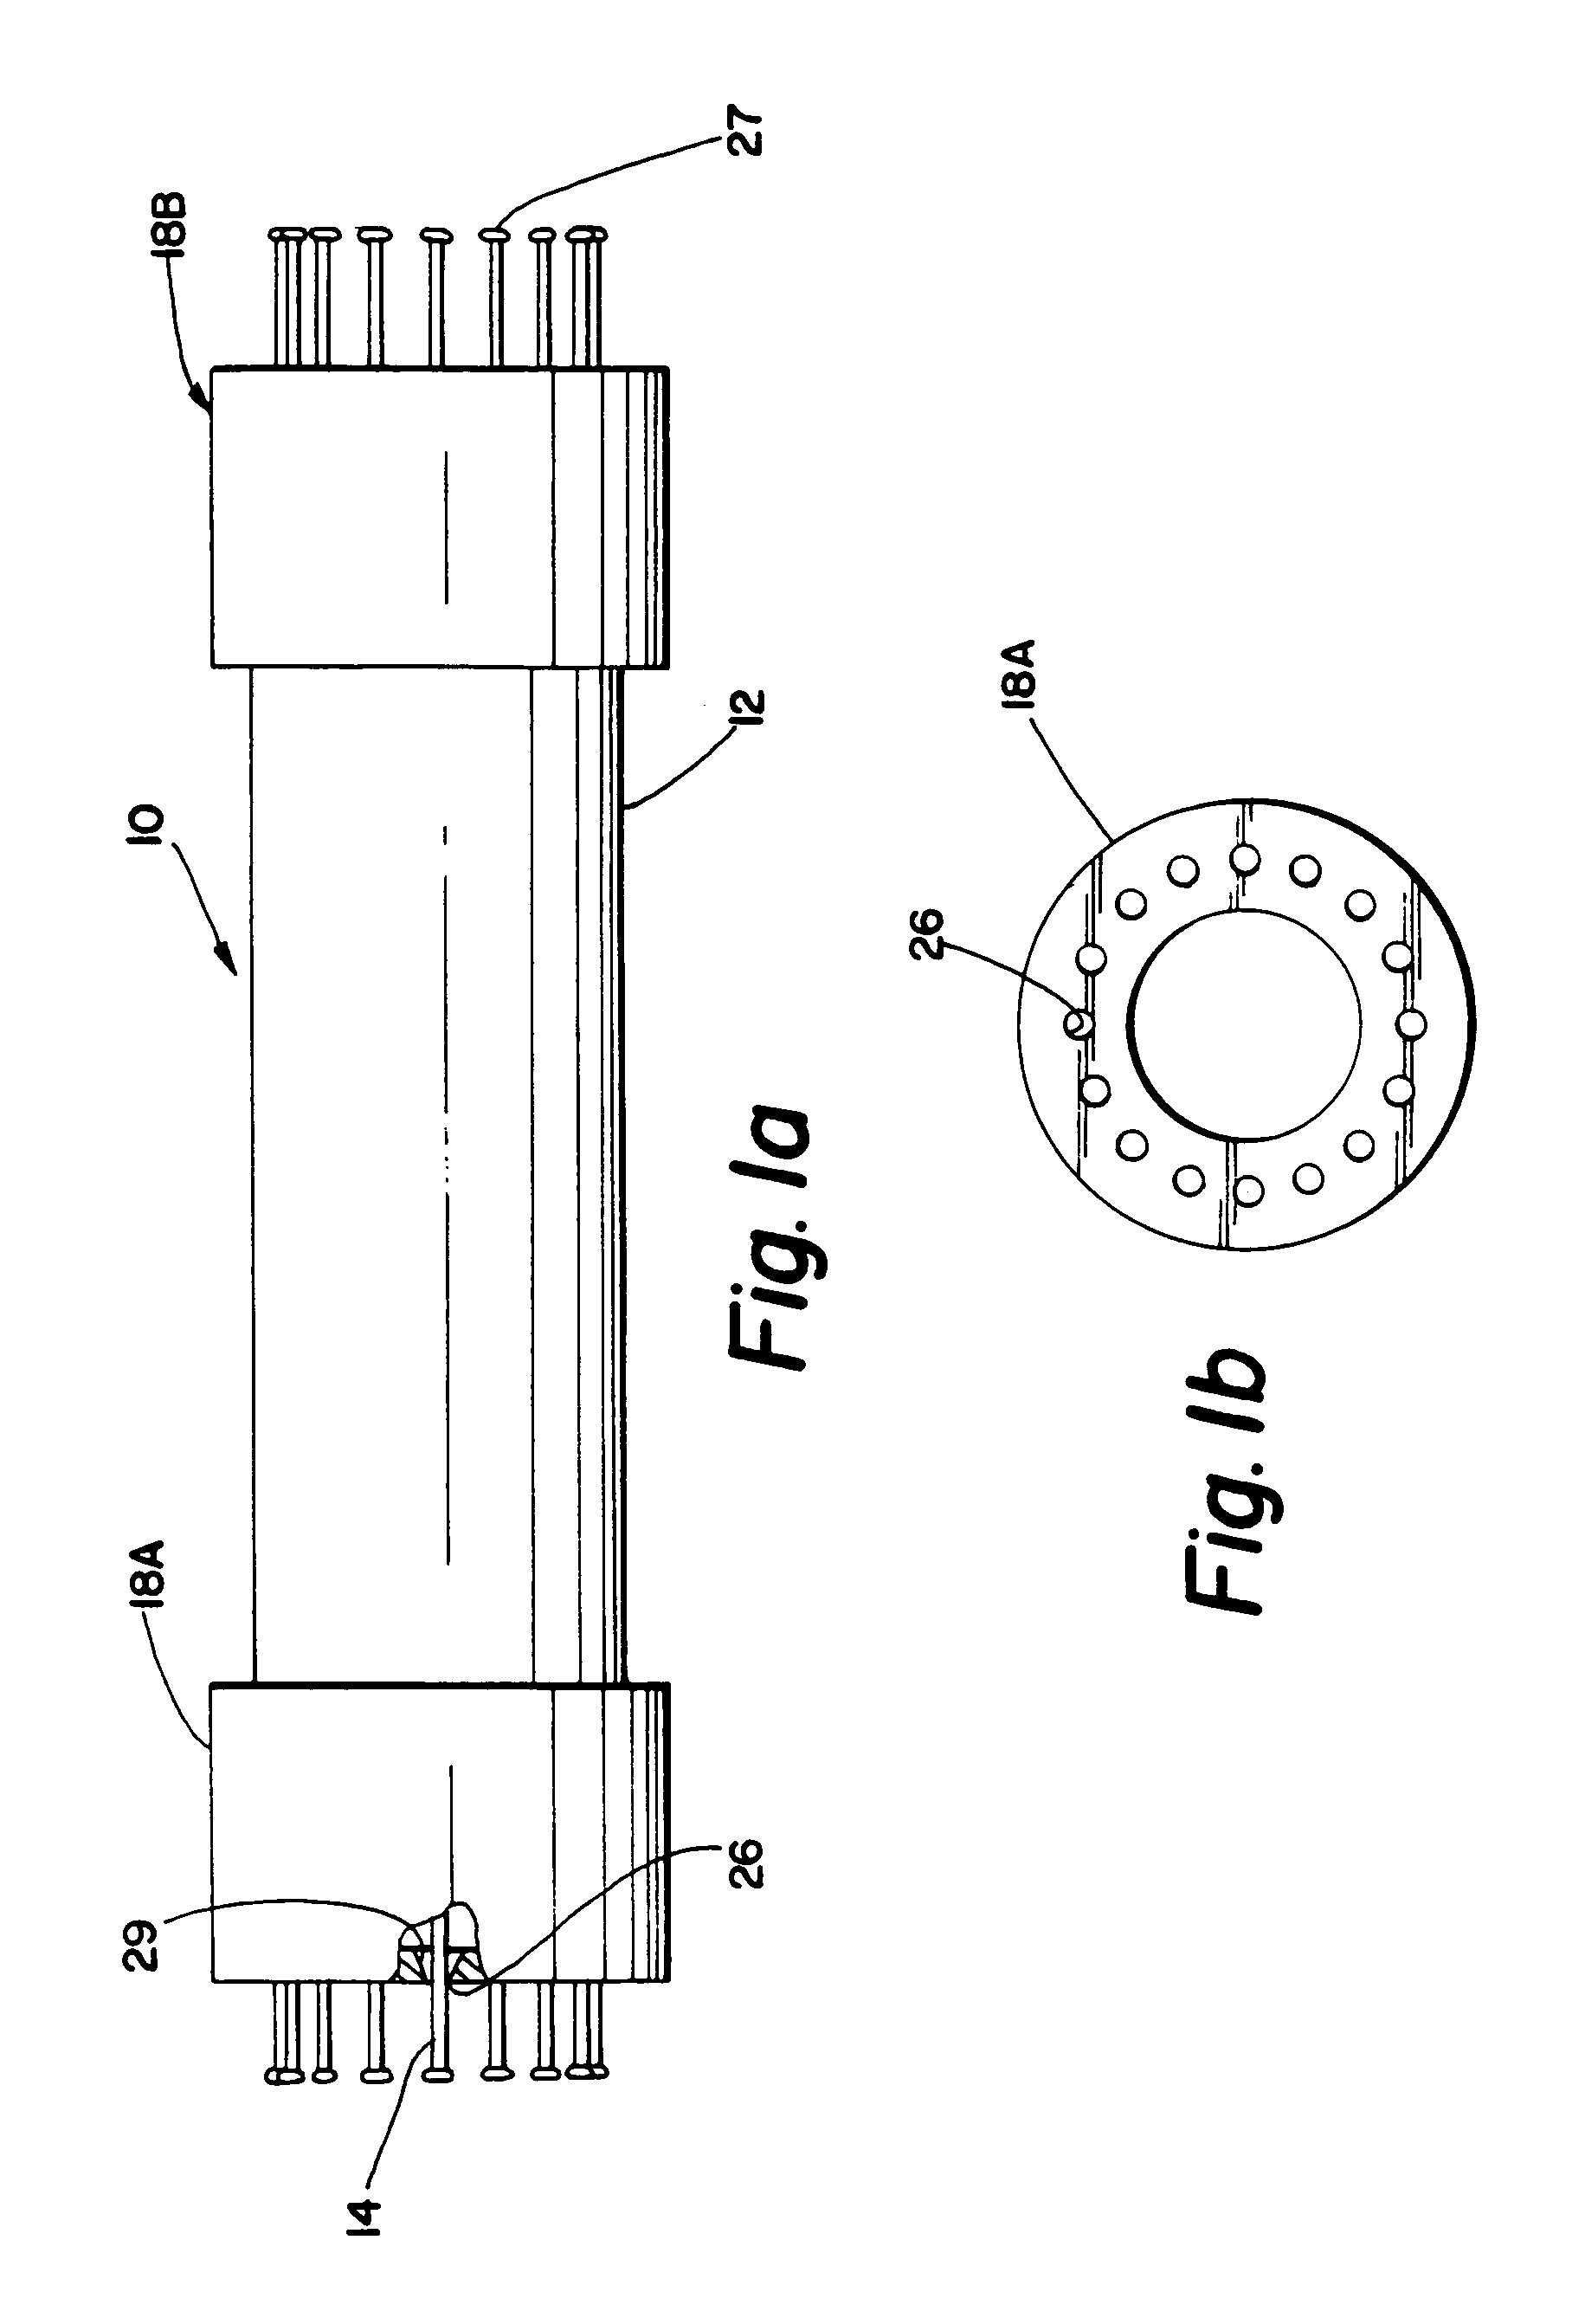 Universal support and vibration isolator